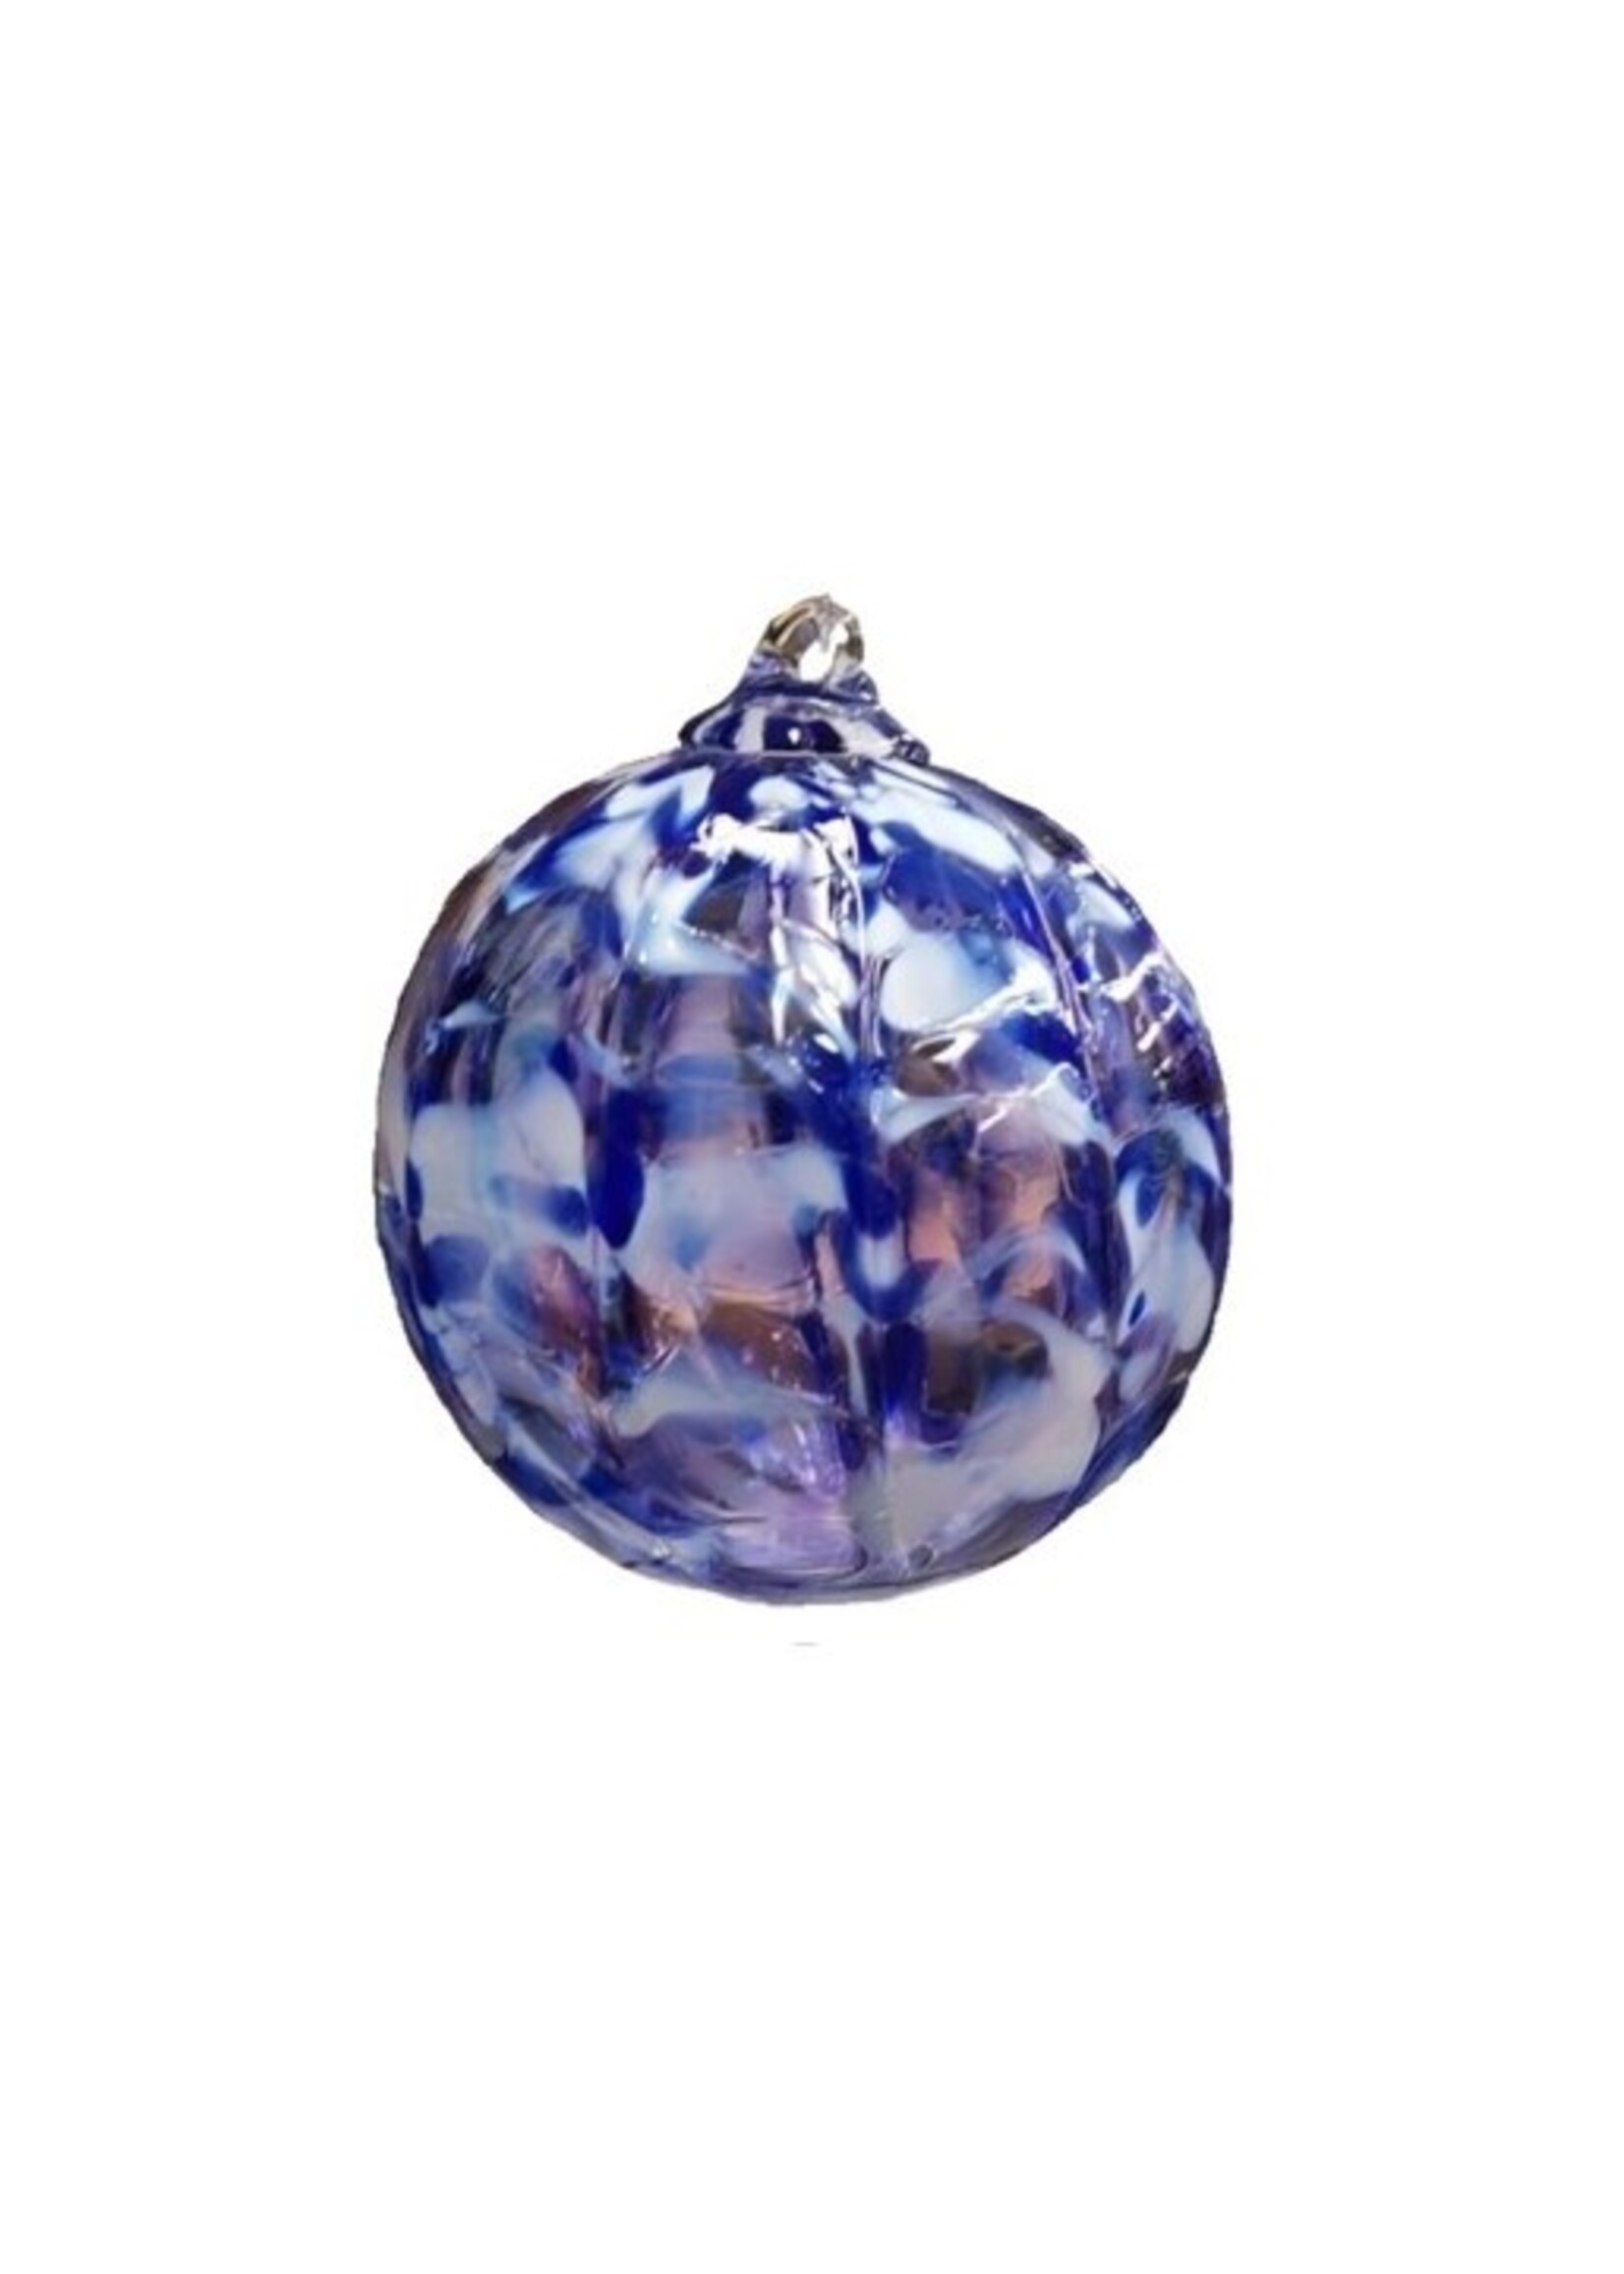 Glass Ornament: Cobalt Blue with White